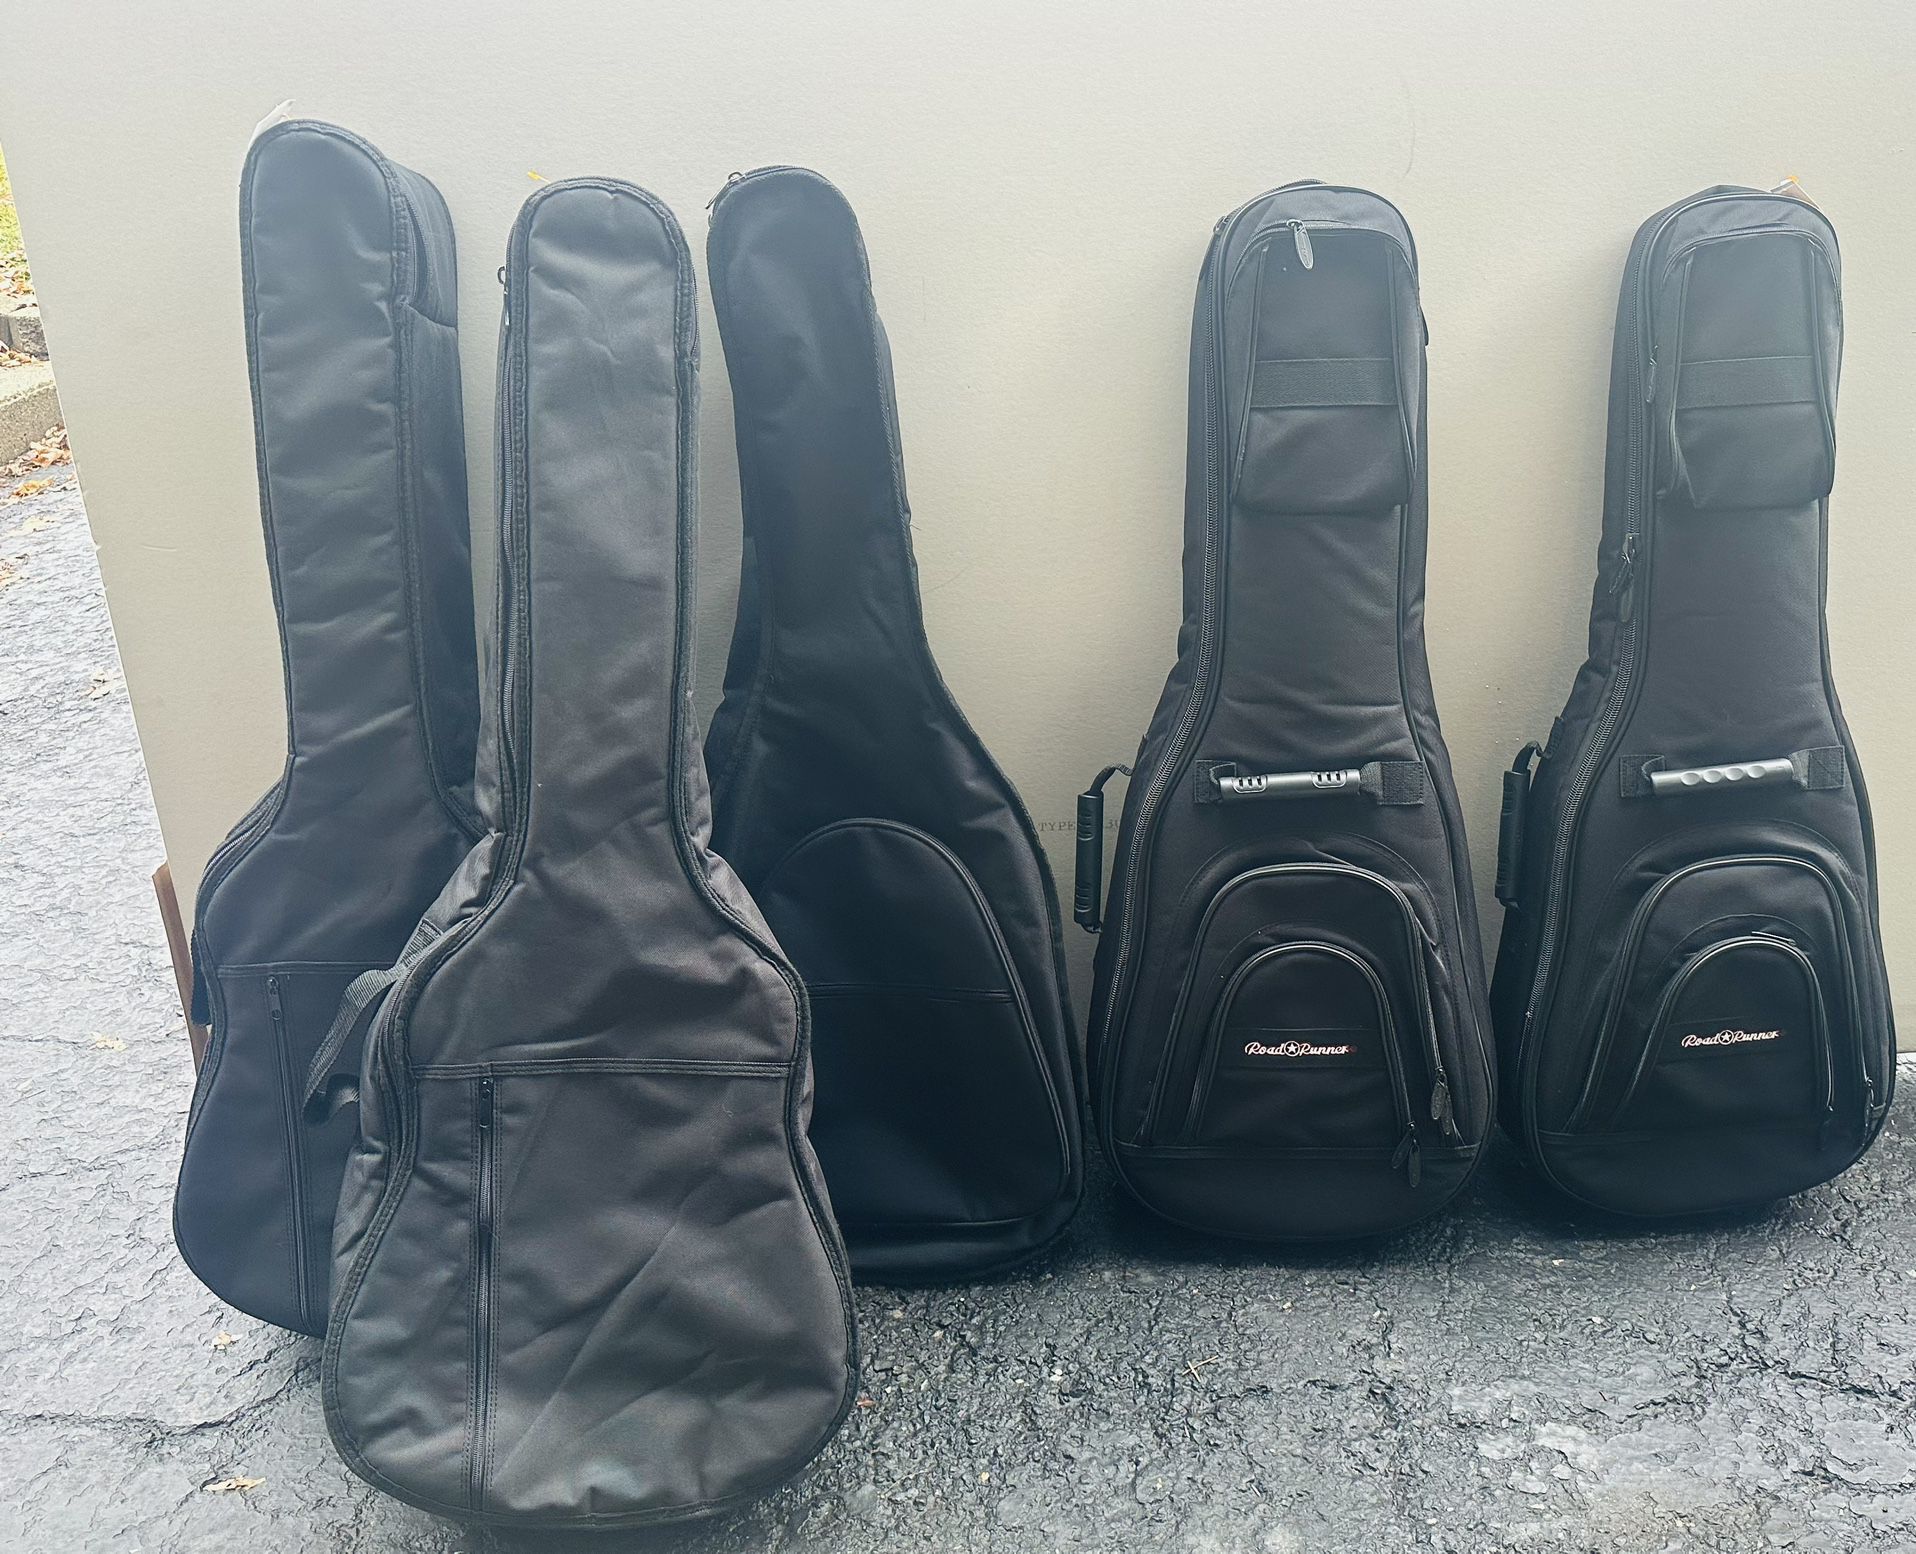 5 Guitar Bags In Great Condition 